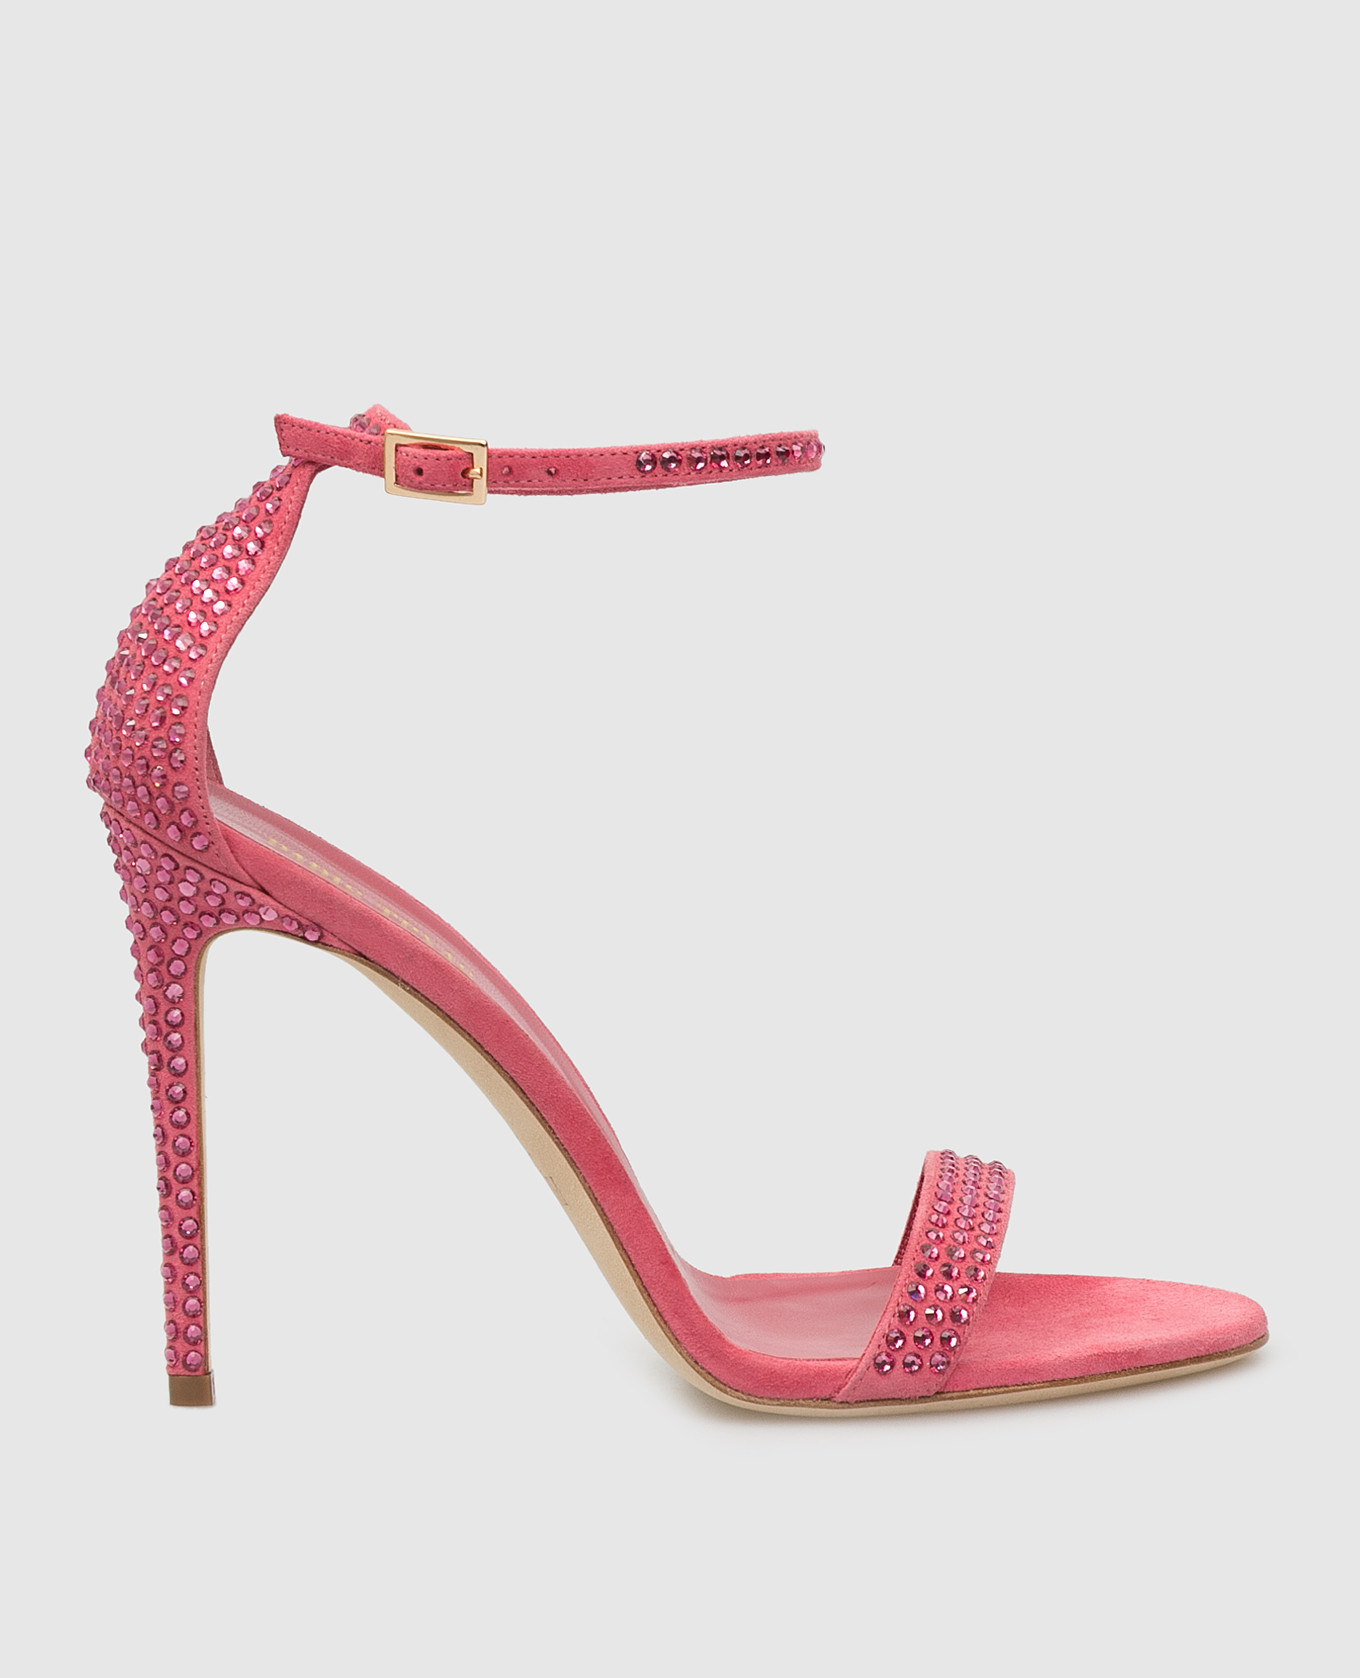 Suede sandals with crystals